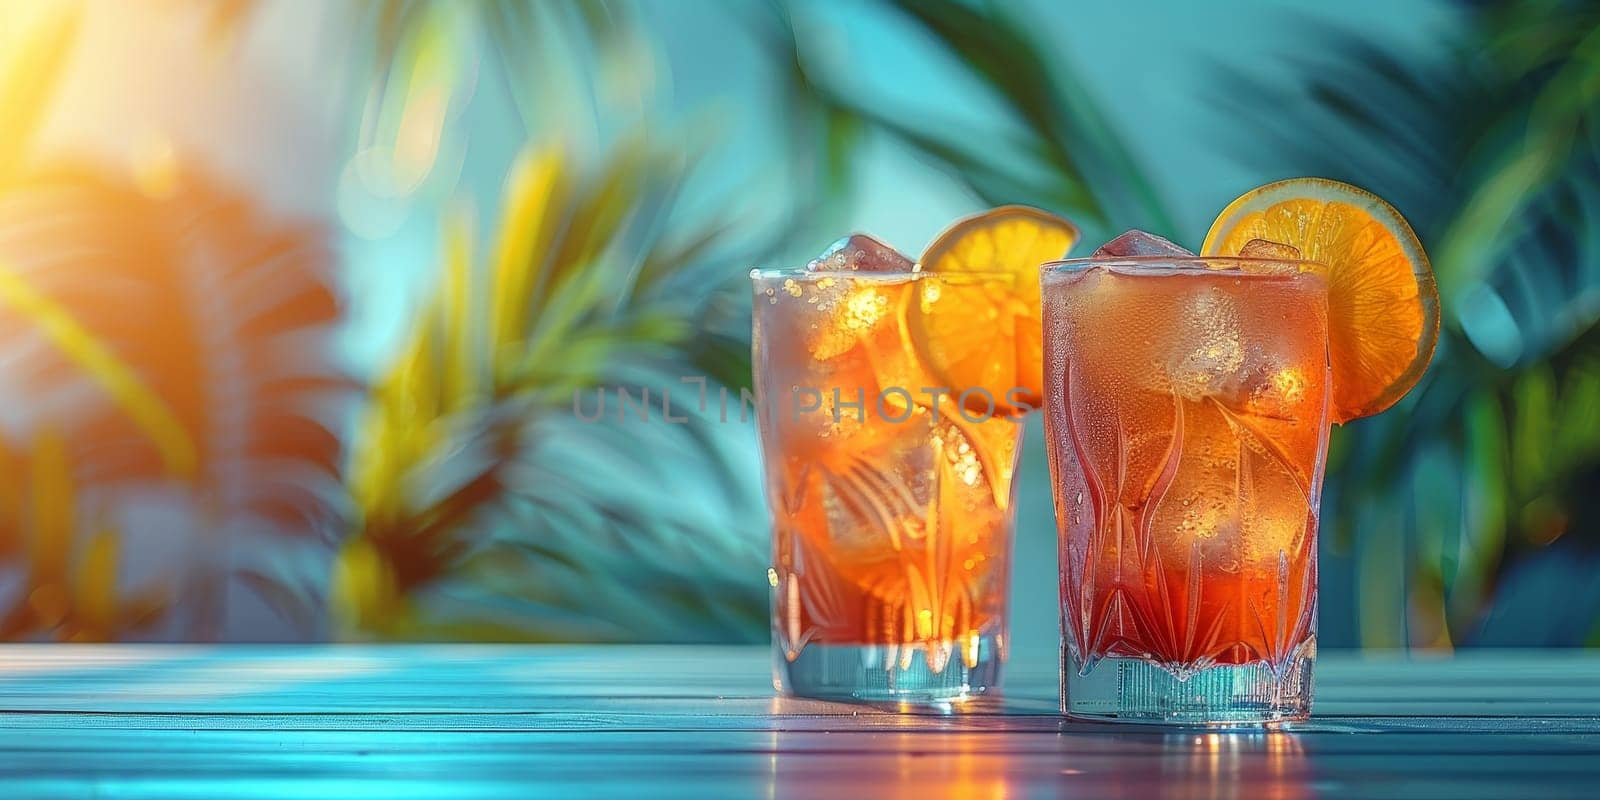 Two drinks with ice and orange slices in glasses on a table. The drinks are in a tropical setting with palm trees in the background